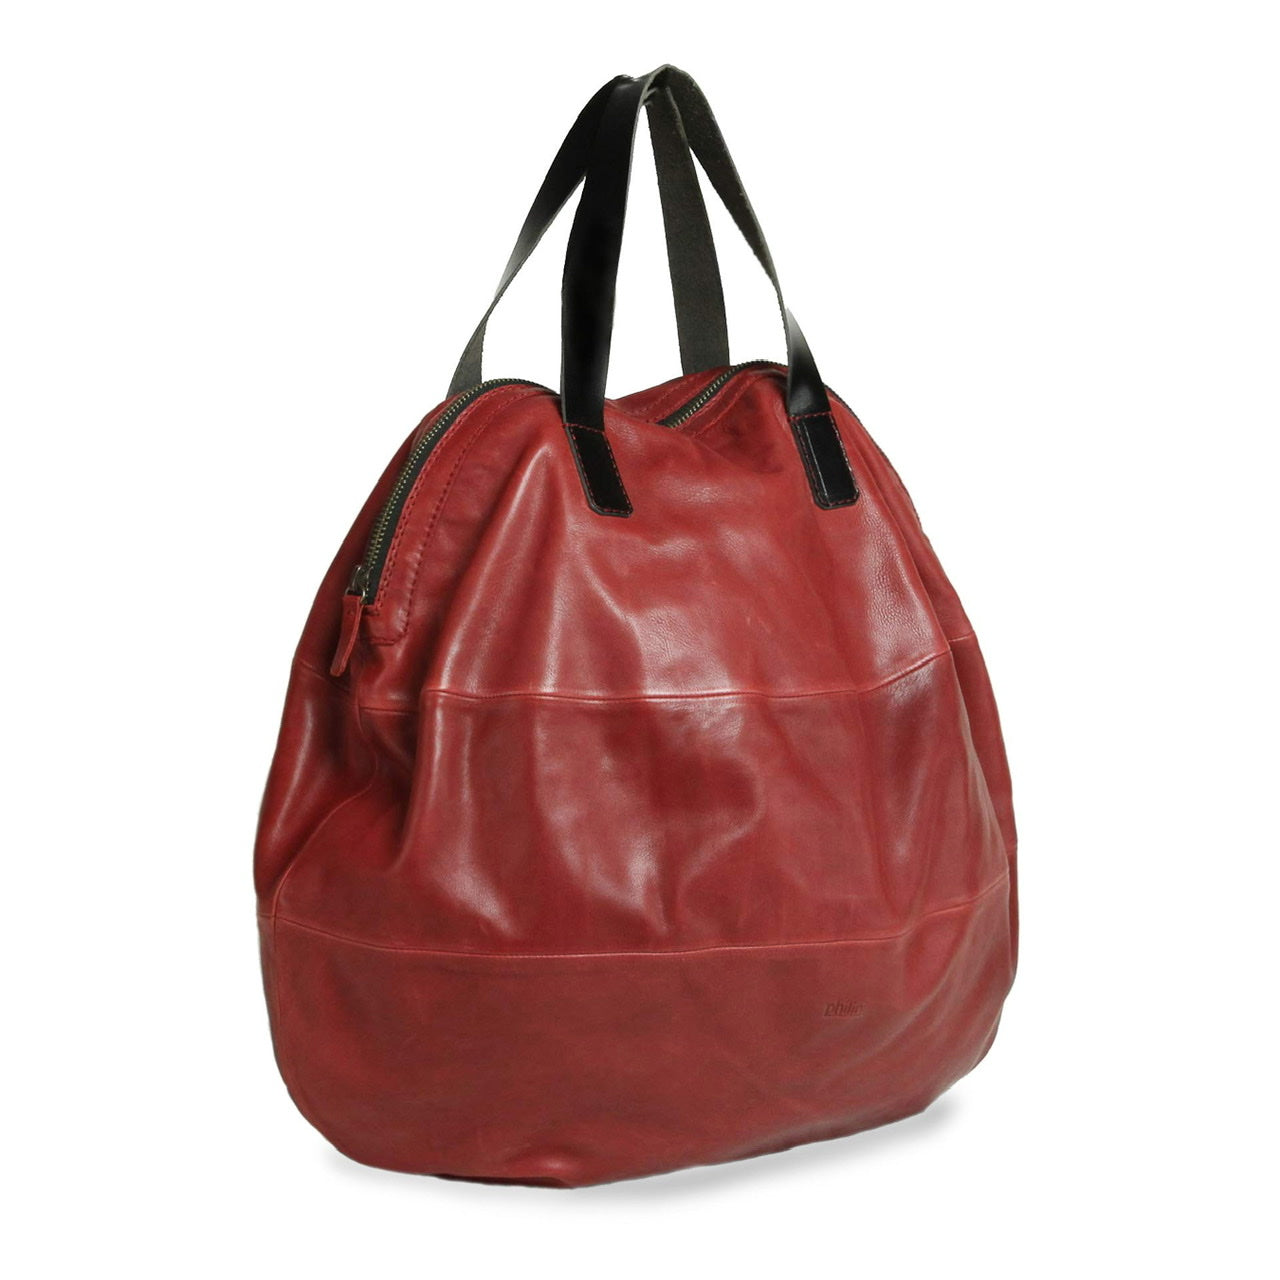 Handbag in red aniline leather from Philini. 